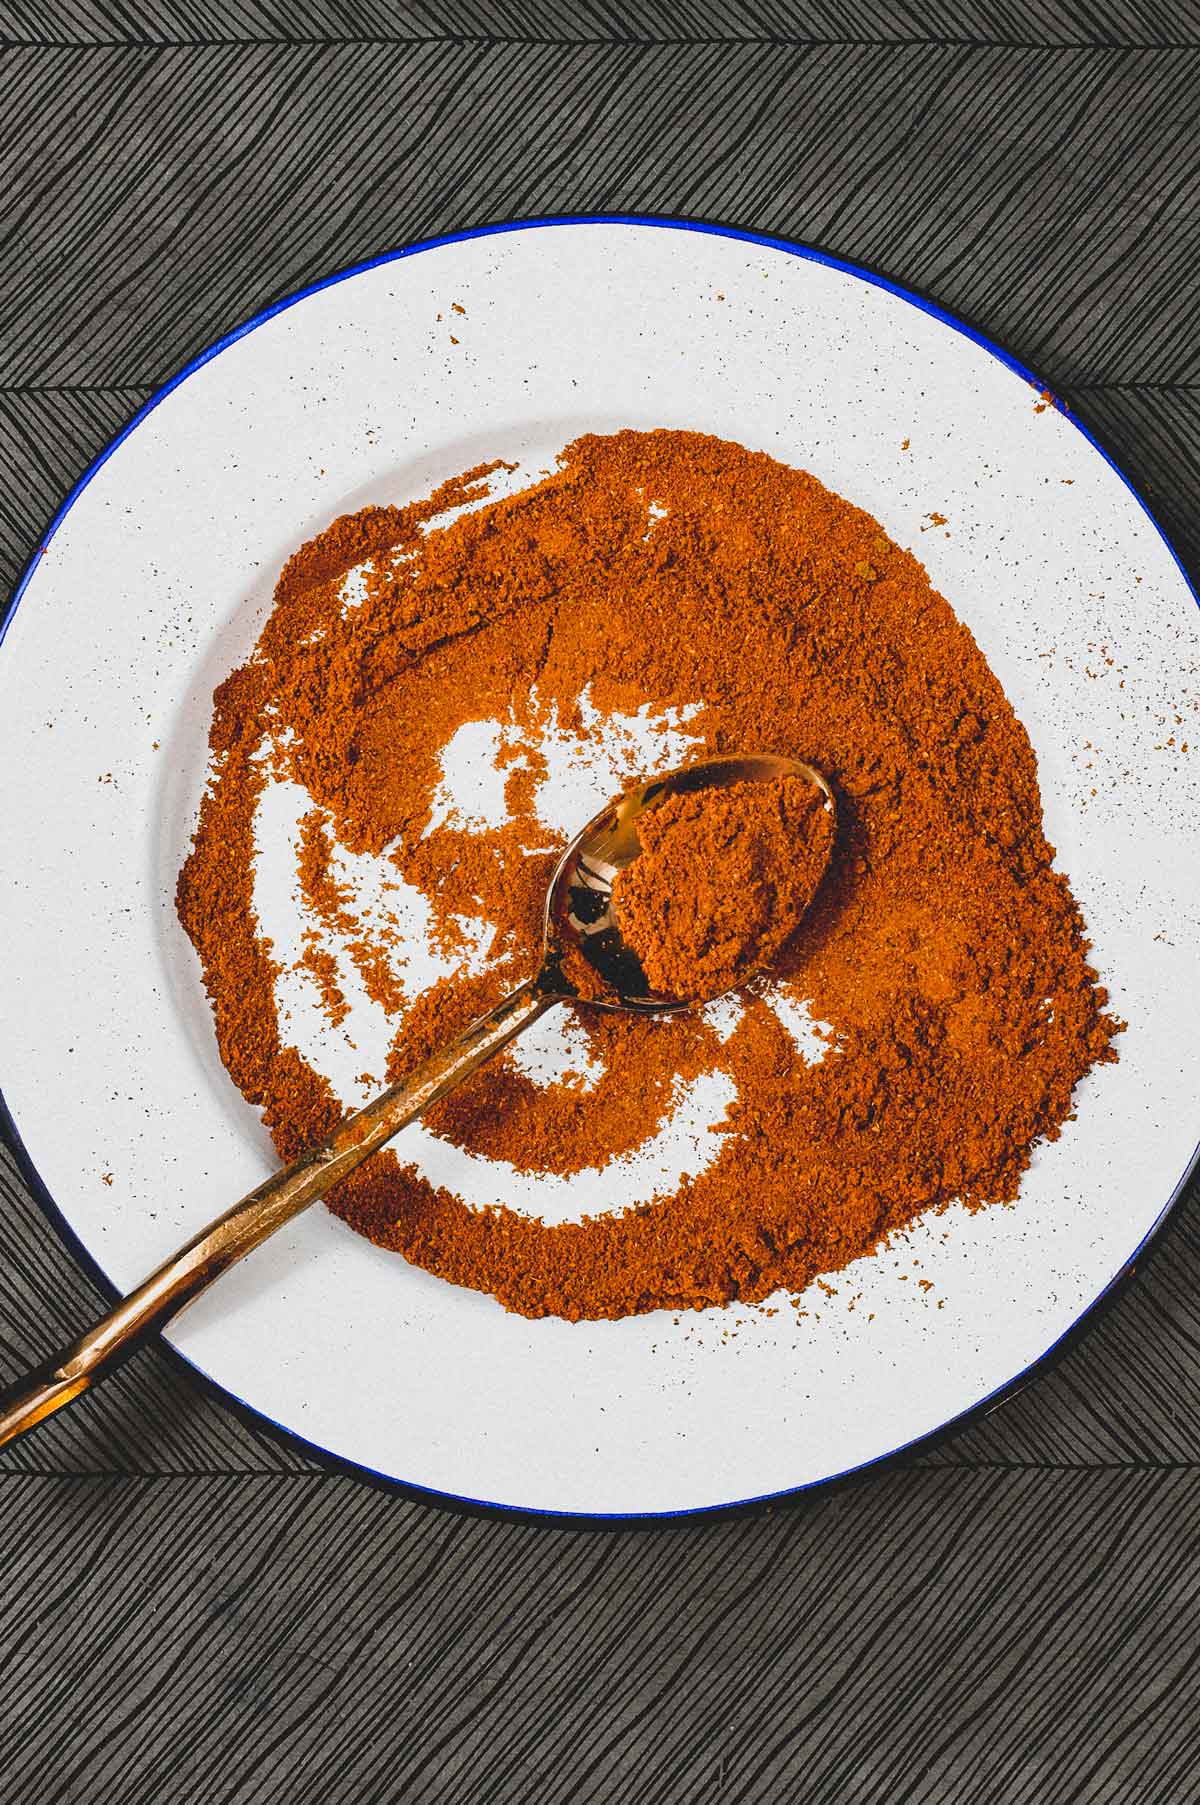 A combination of spices form a bright red Malaysian Curry Powder